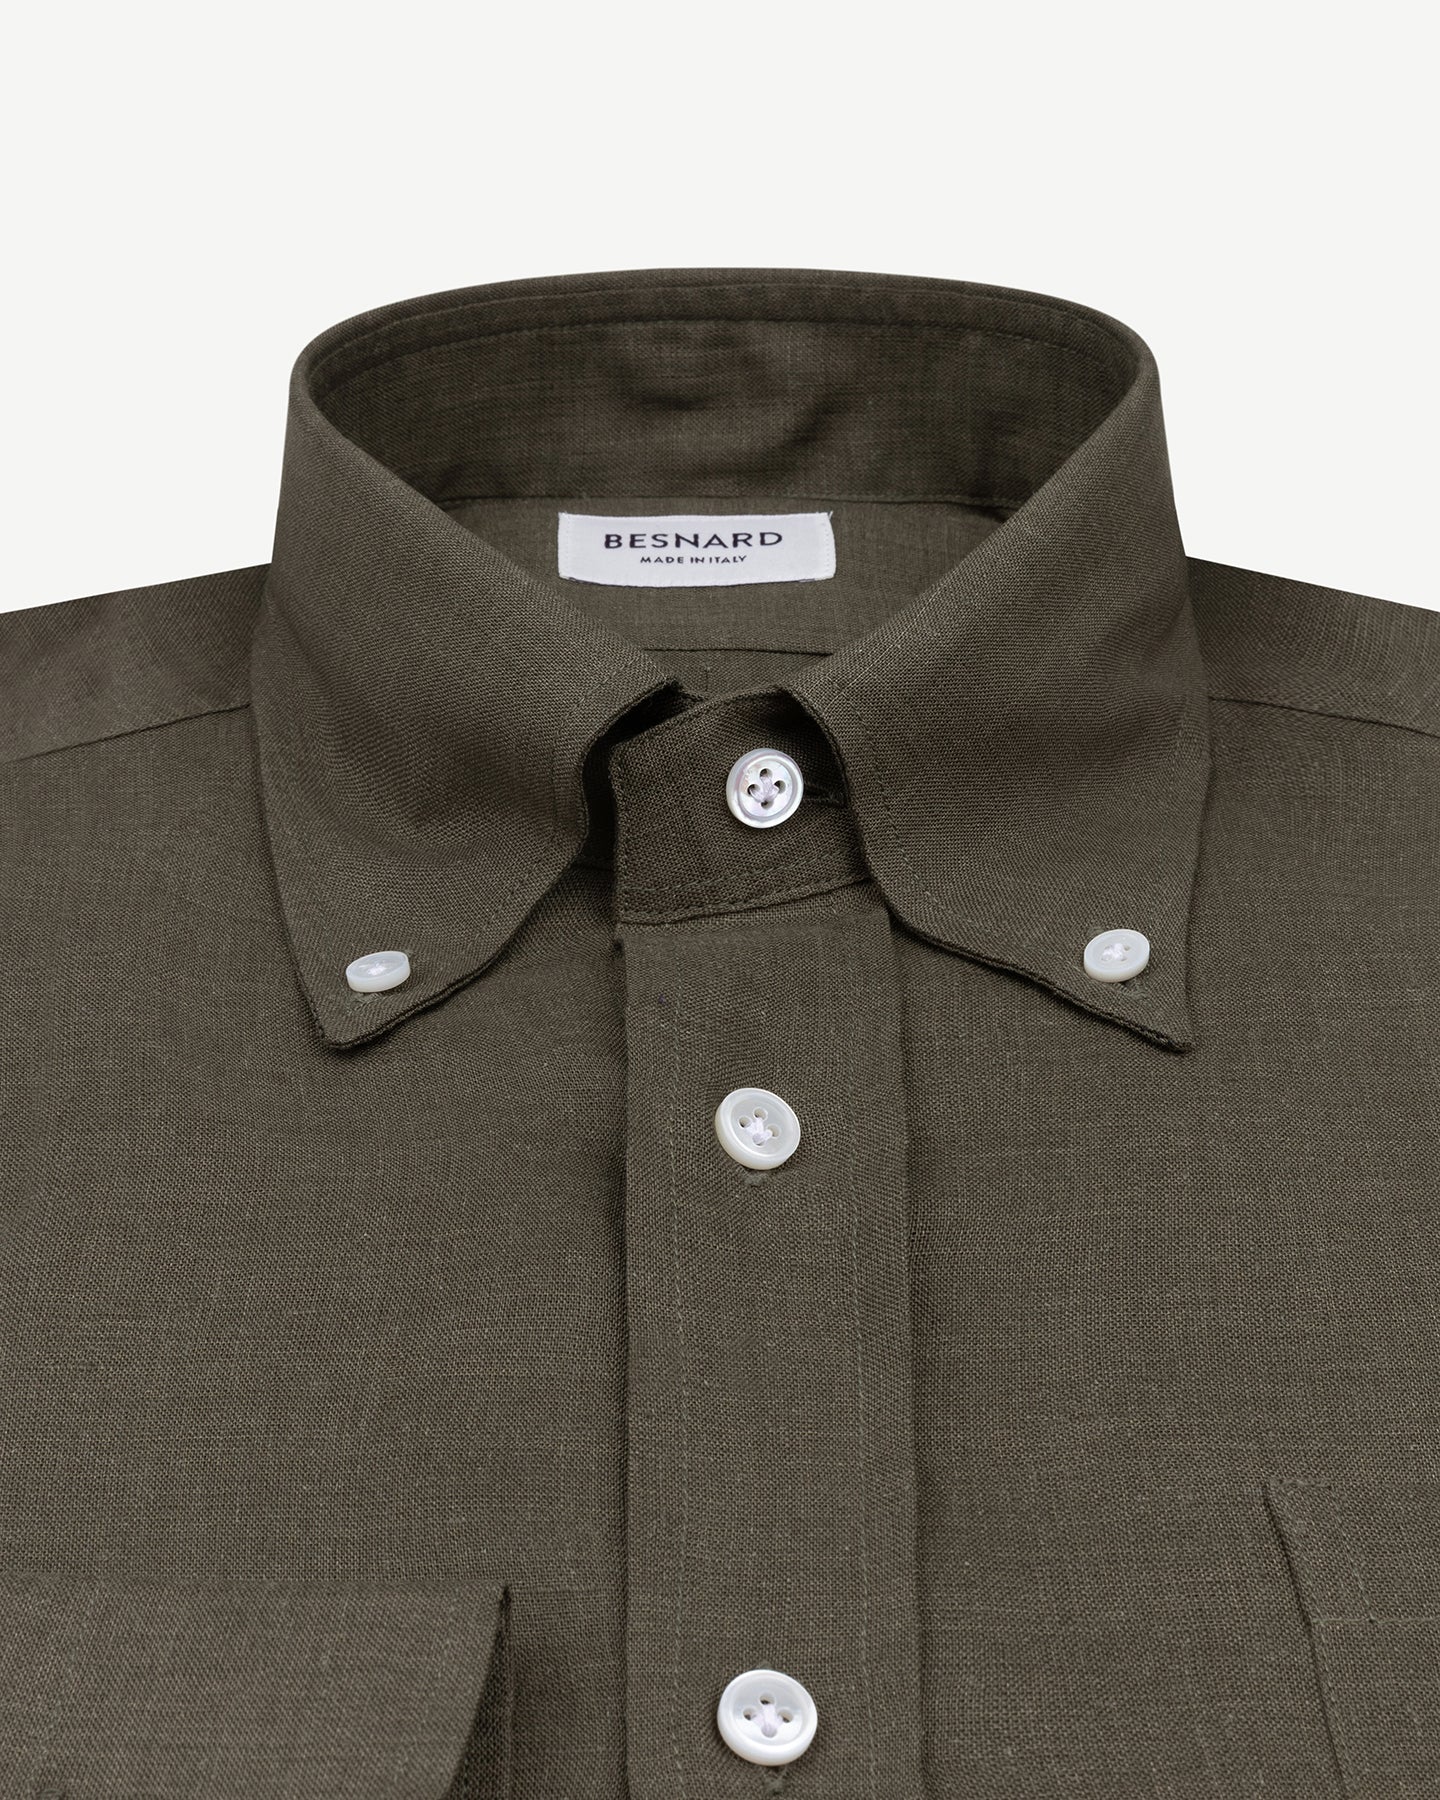 Olive green linen shirt with button down collar